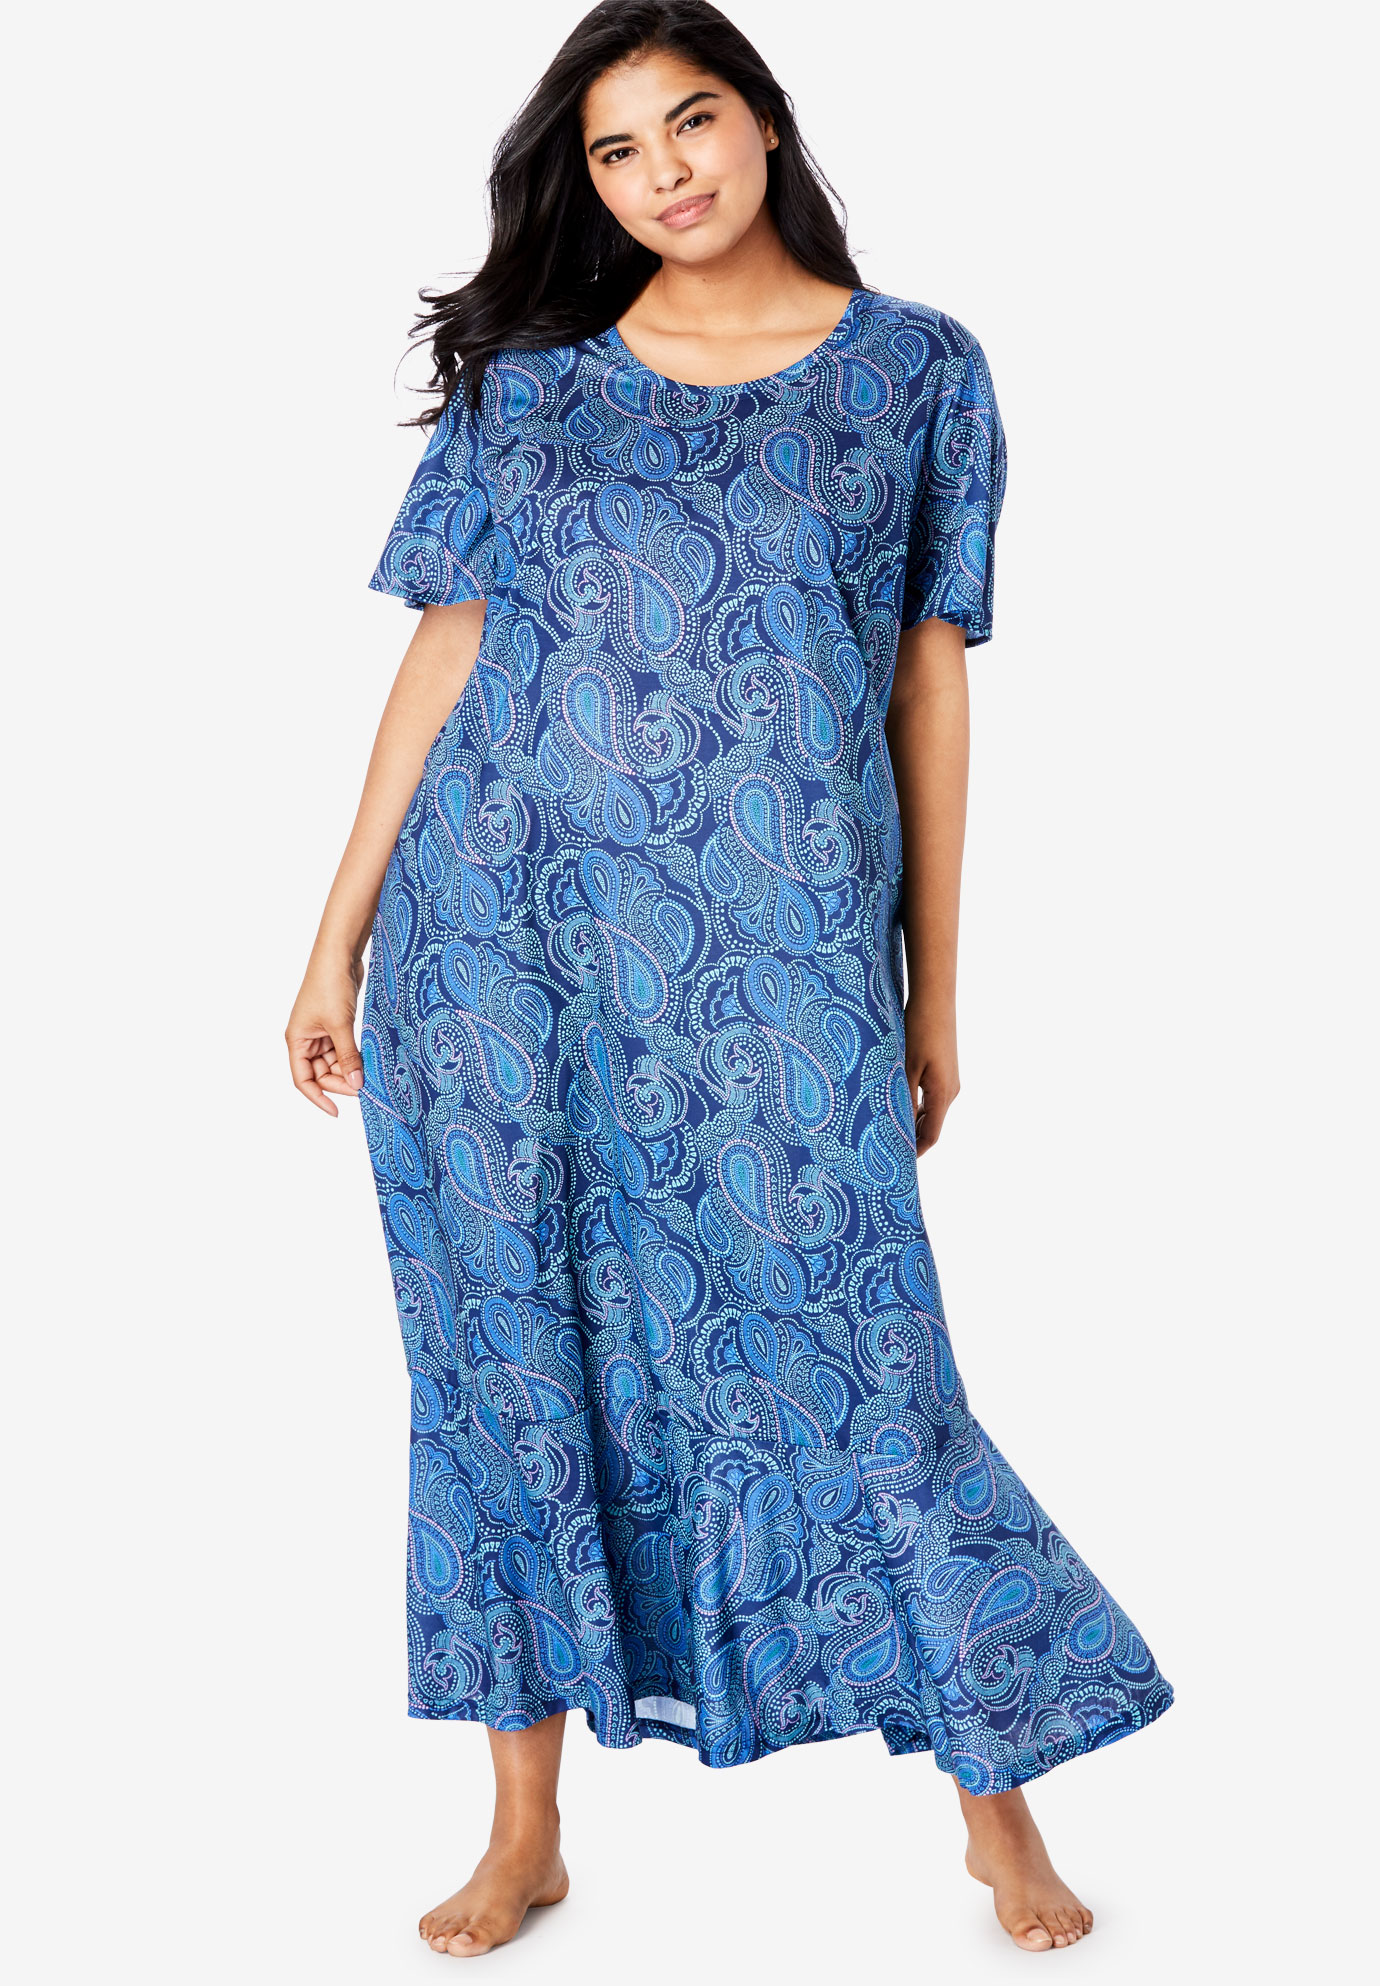 Cool Dreams Flounced Nightgown by Only Necessities®| Plus Size ...